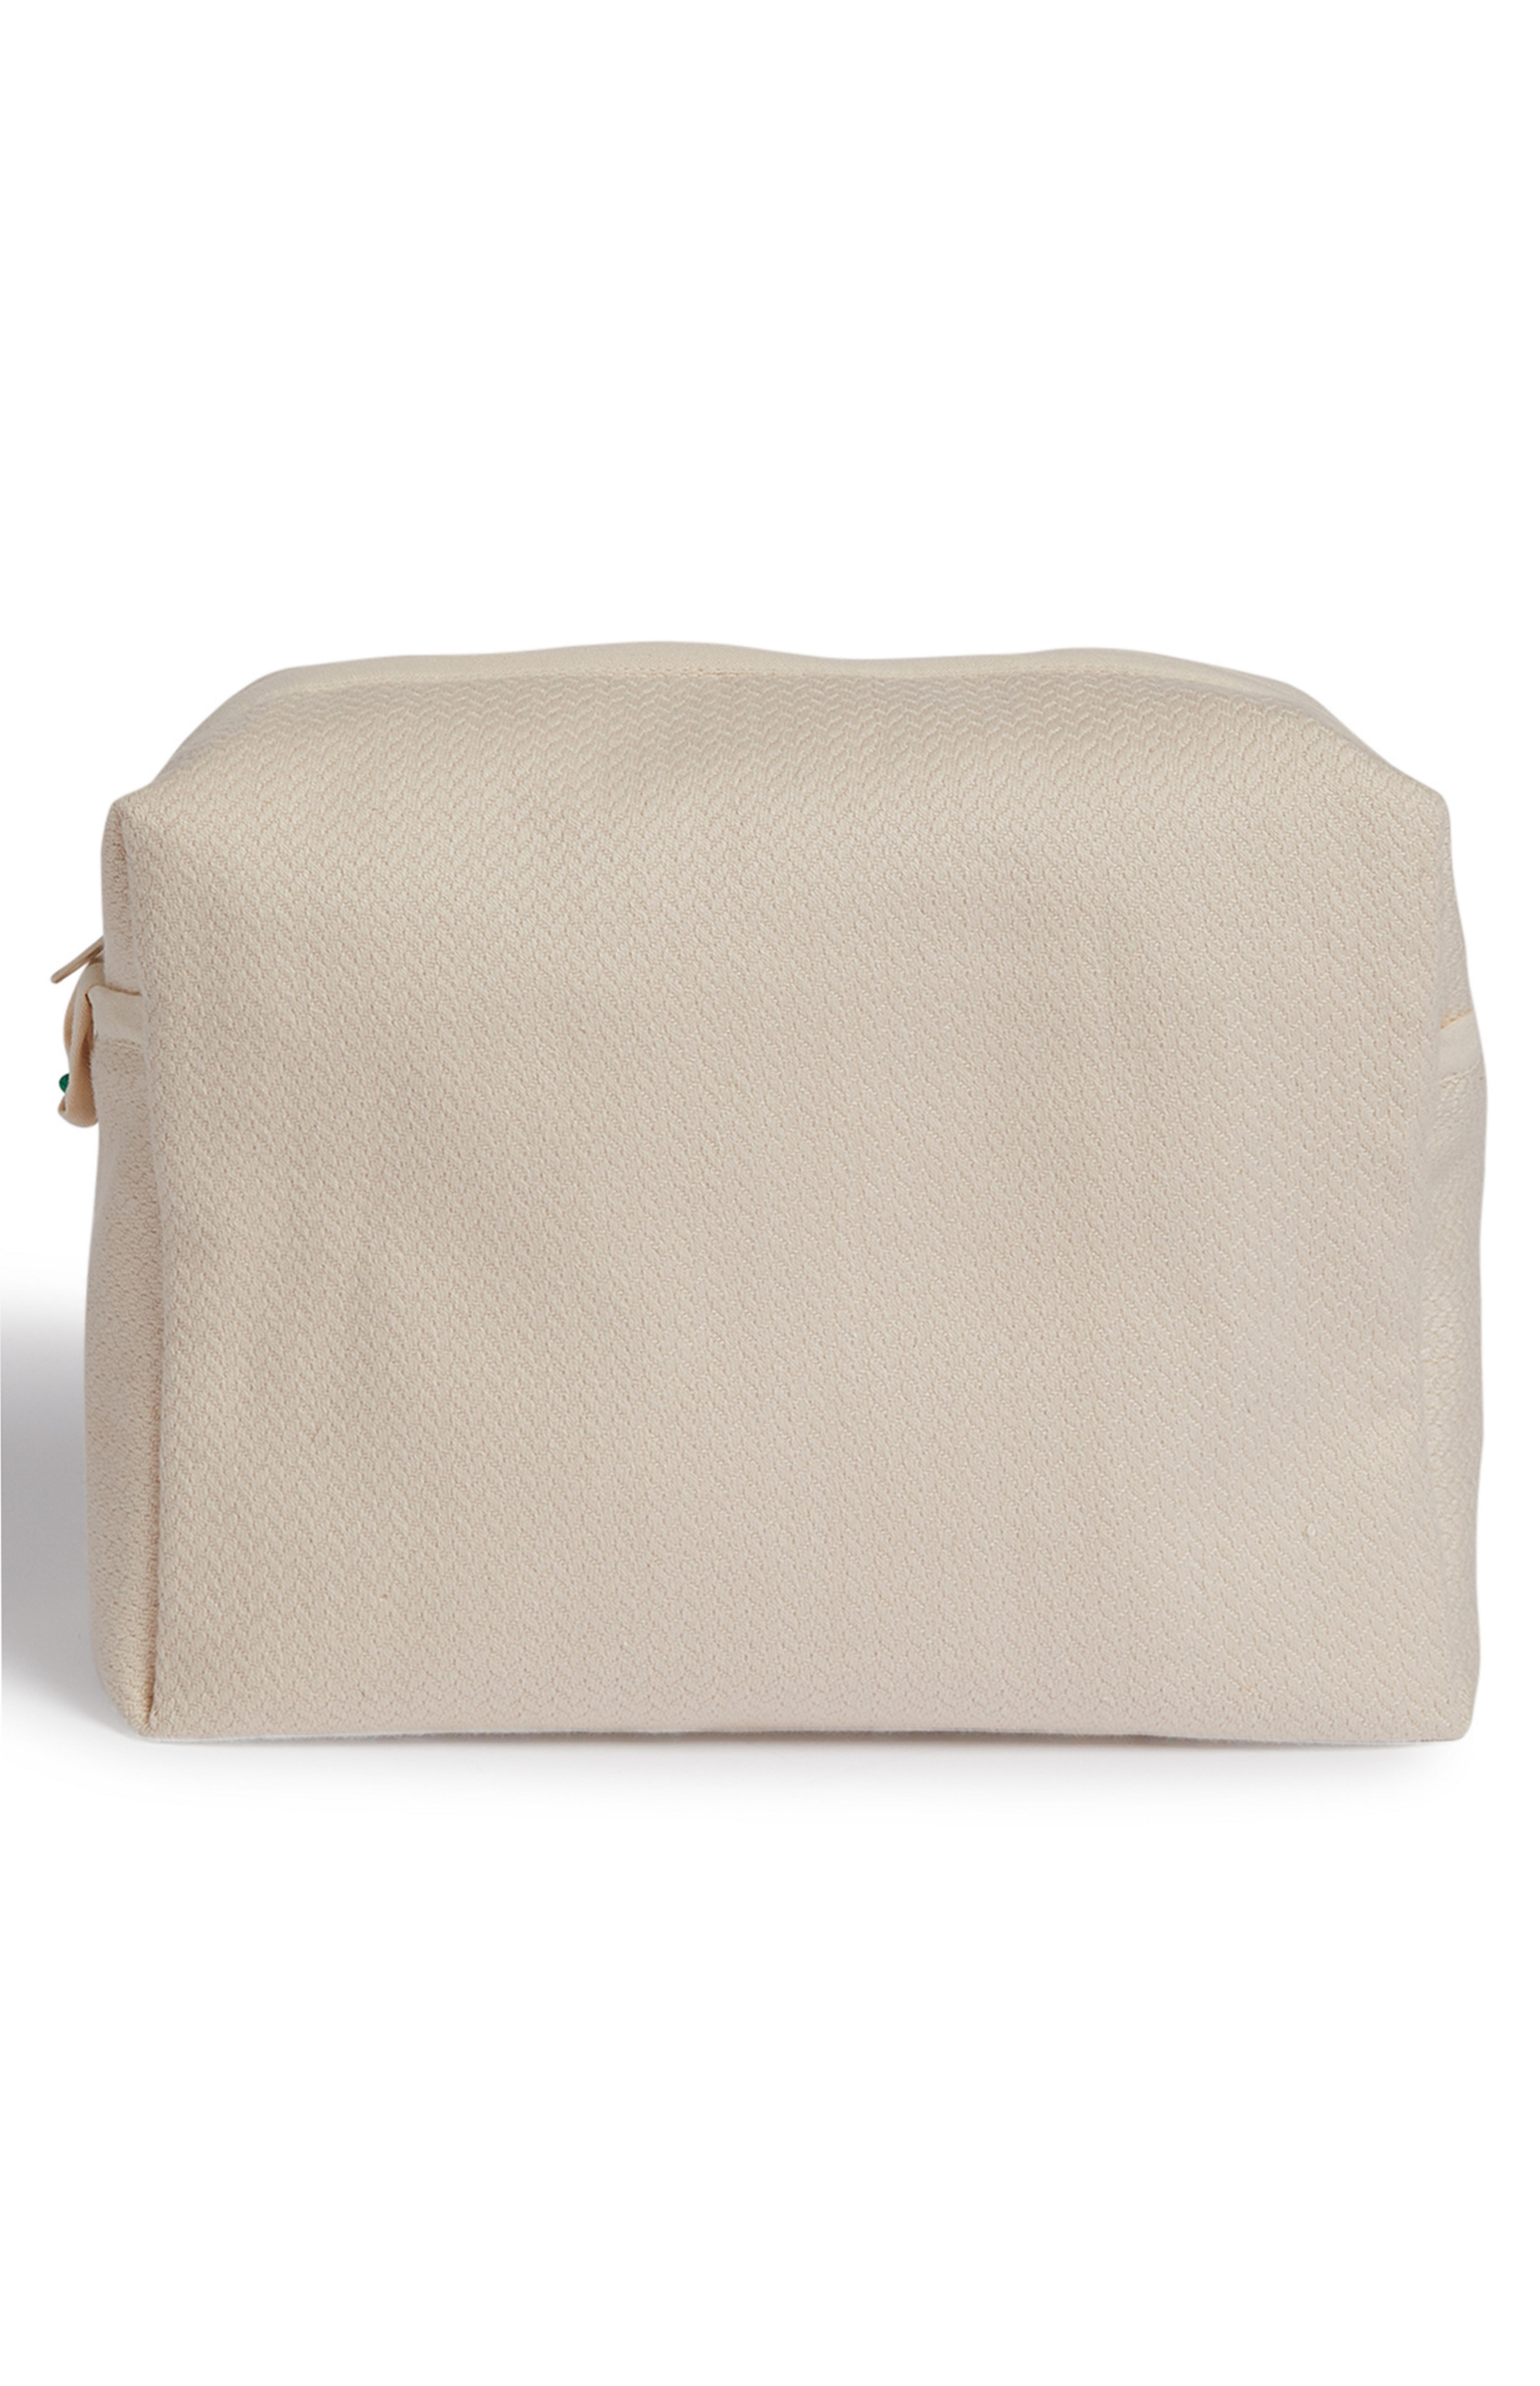 Cream Sustainable Cotton Bag | Makeup Bags | Beauty Accessories ...